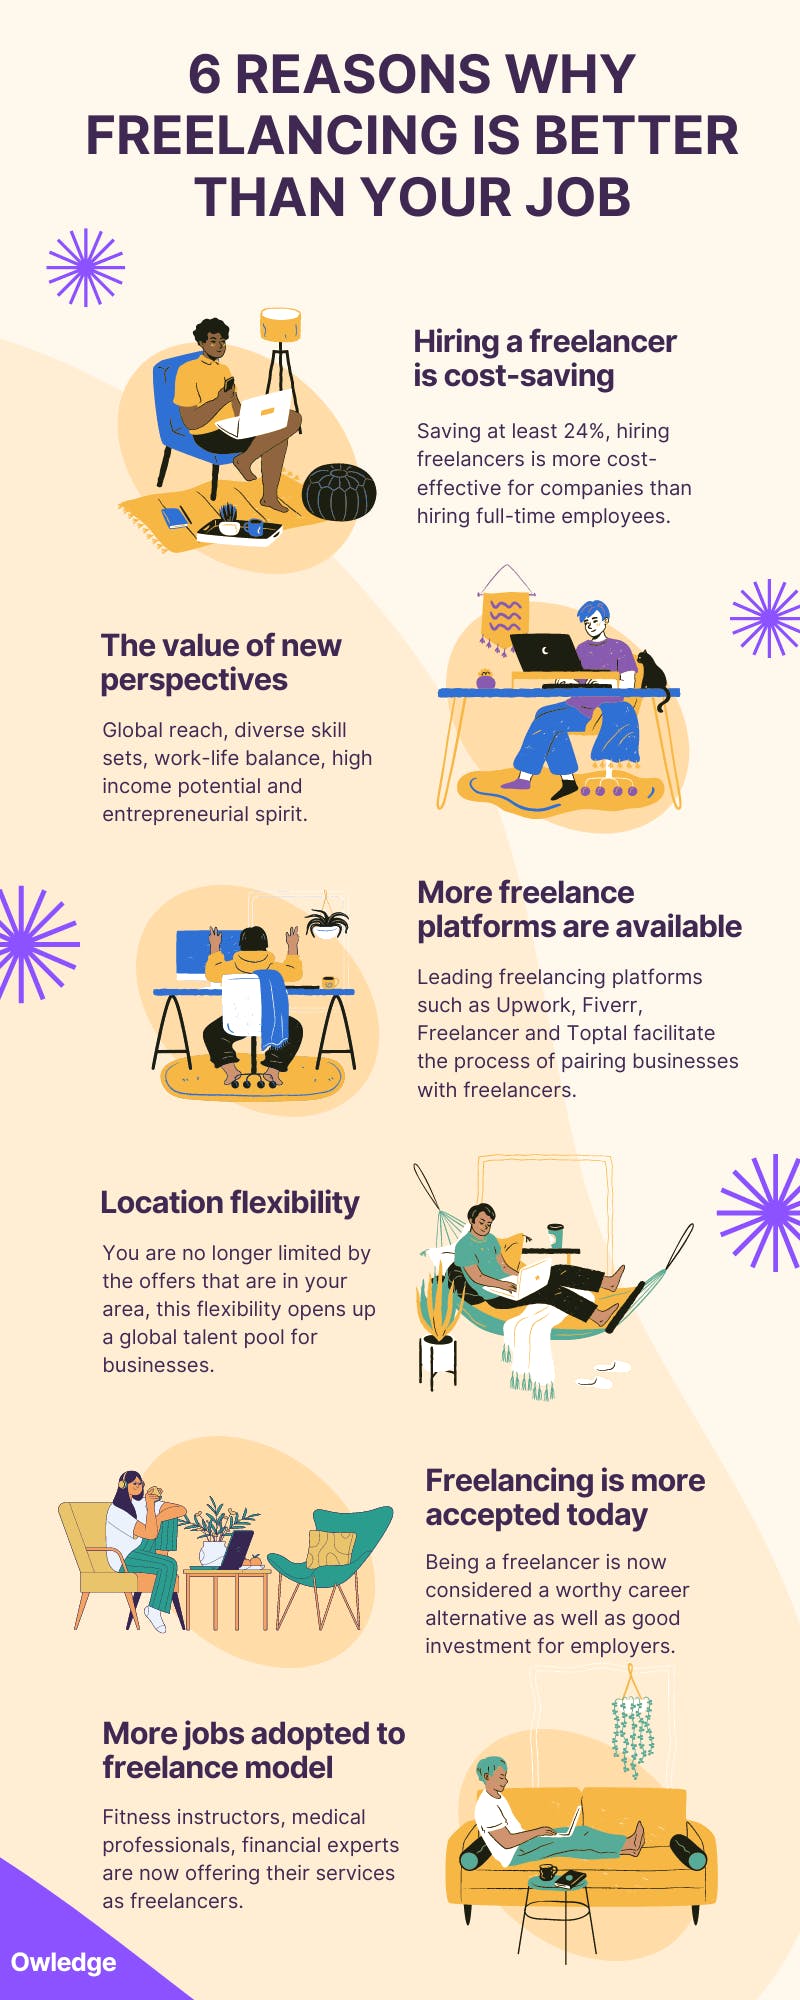 Why freelancing is better than your 9-5 job